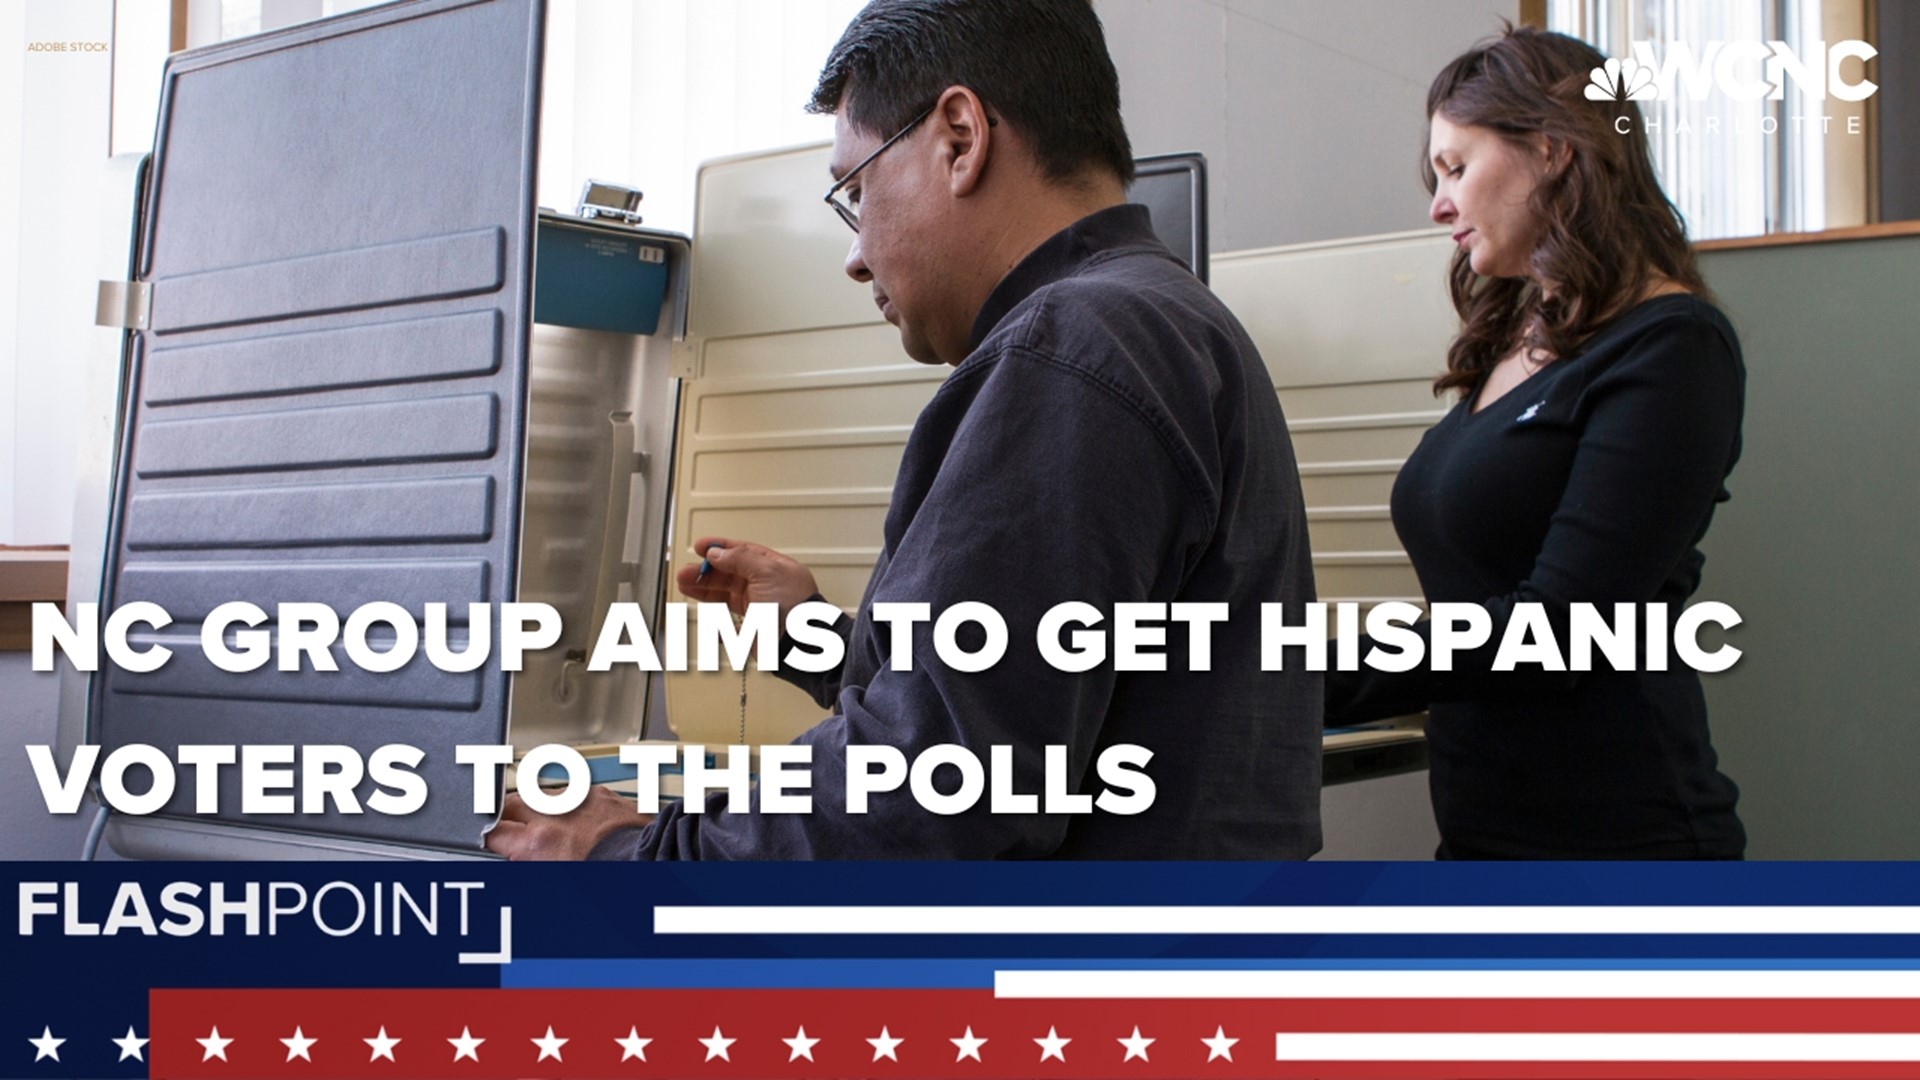 On Flashpoint, the Hispanic Federation explains the influence of the Hispanic electorate in November's election.